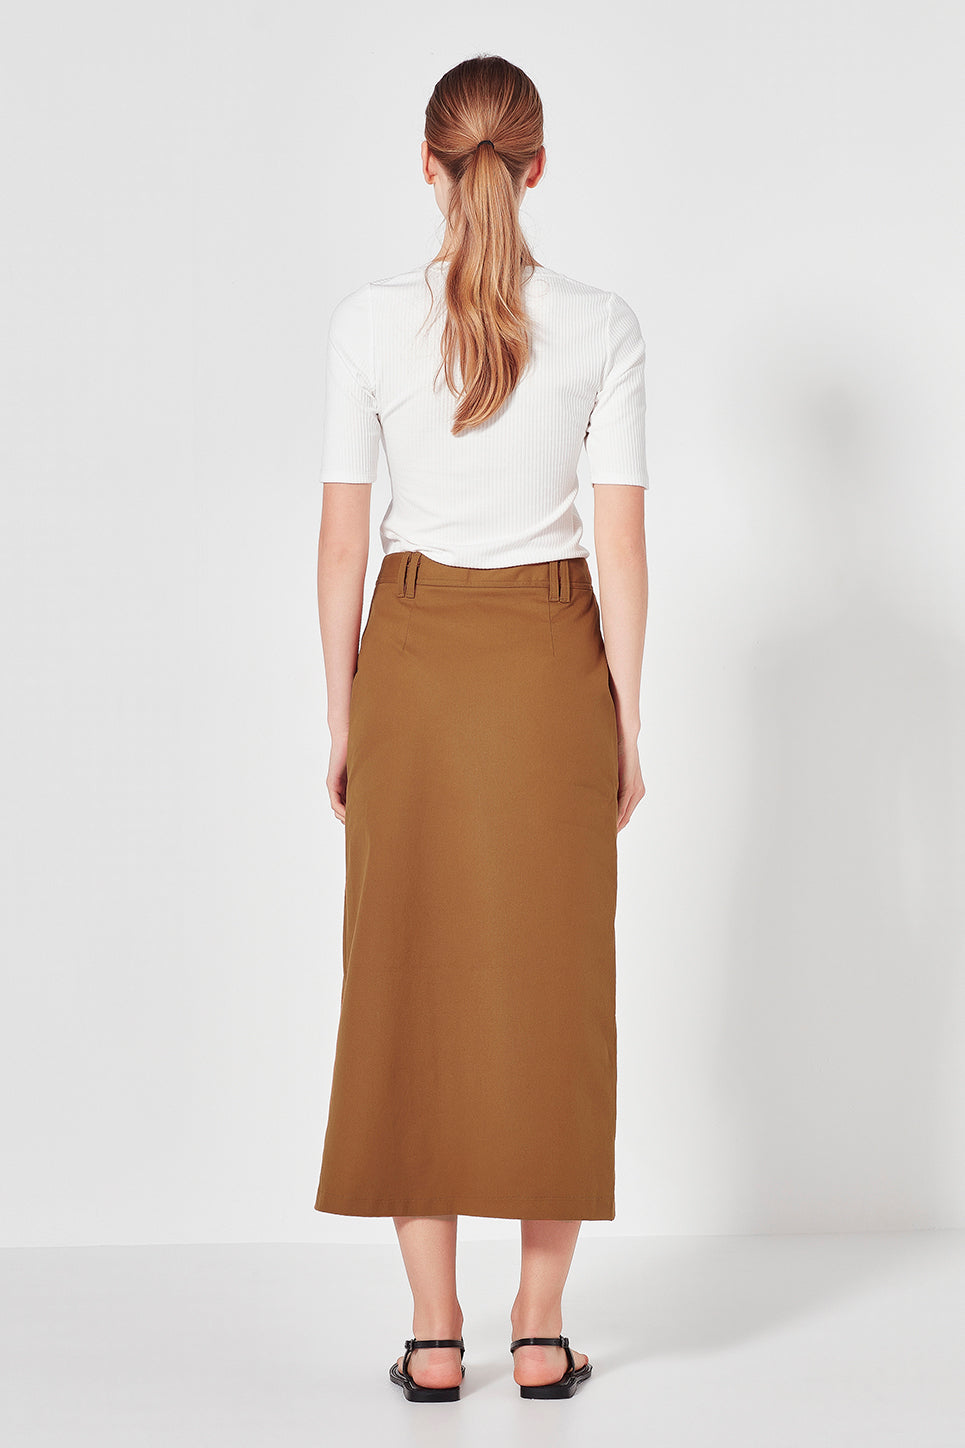 The Dryden Skirt in Tobacco